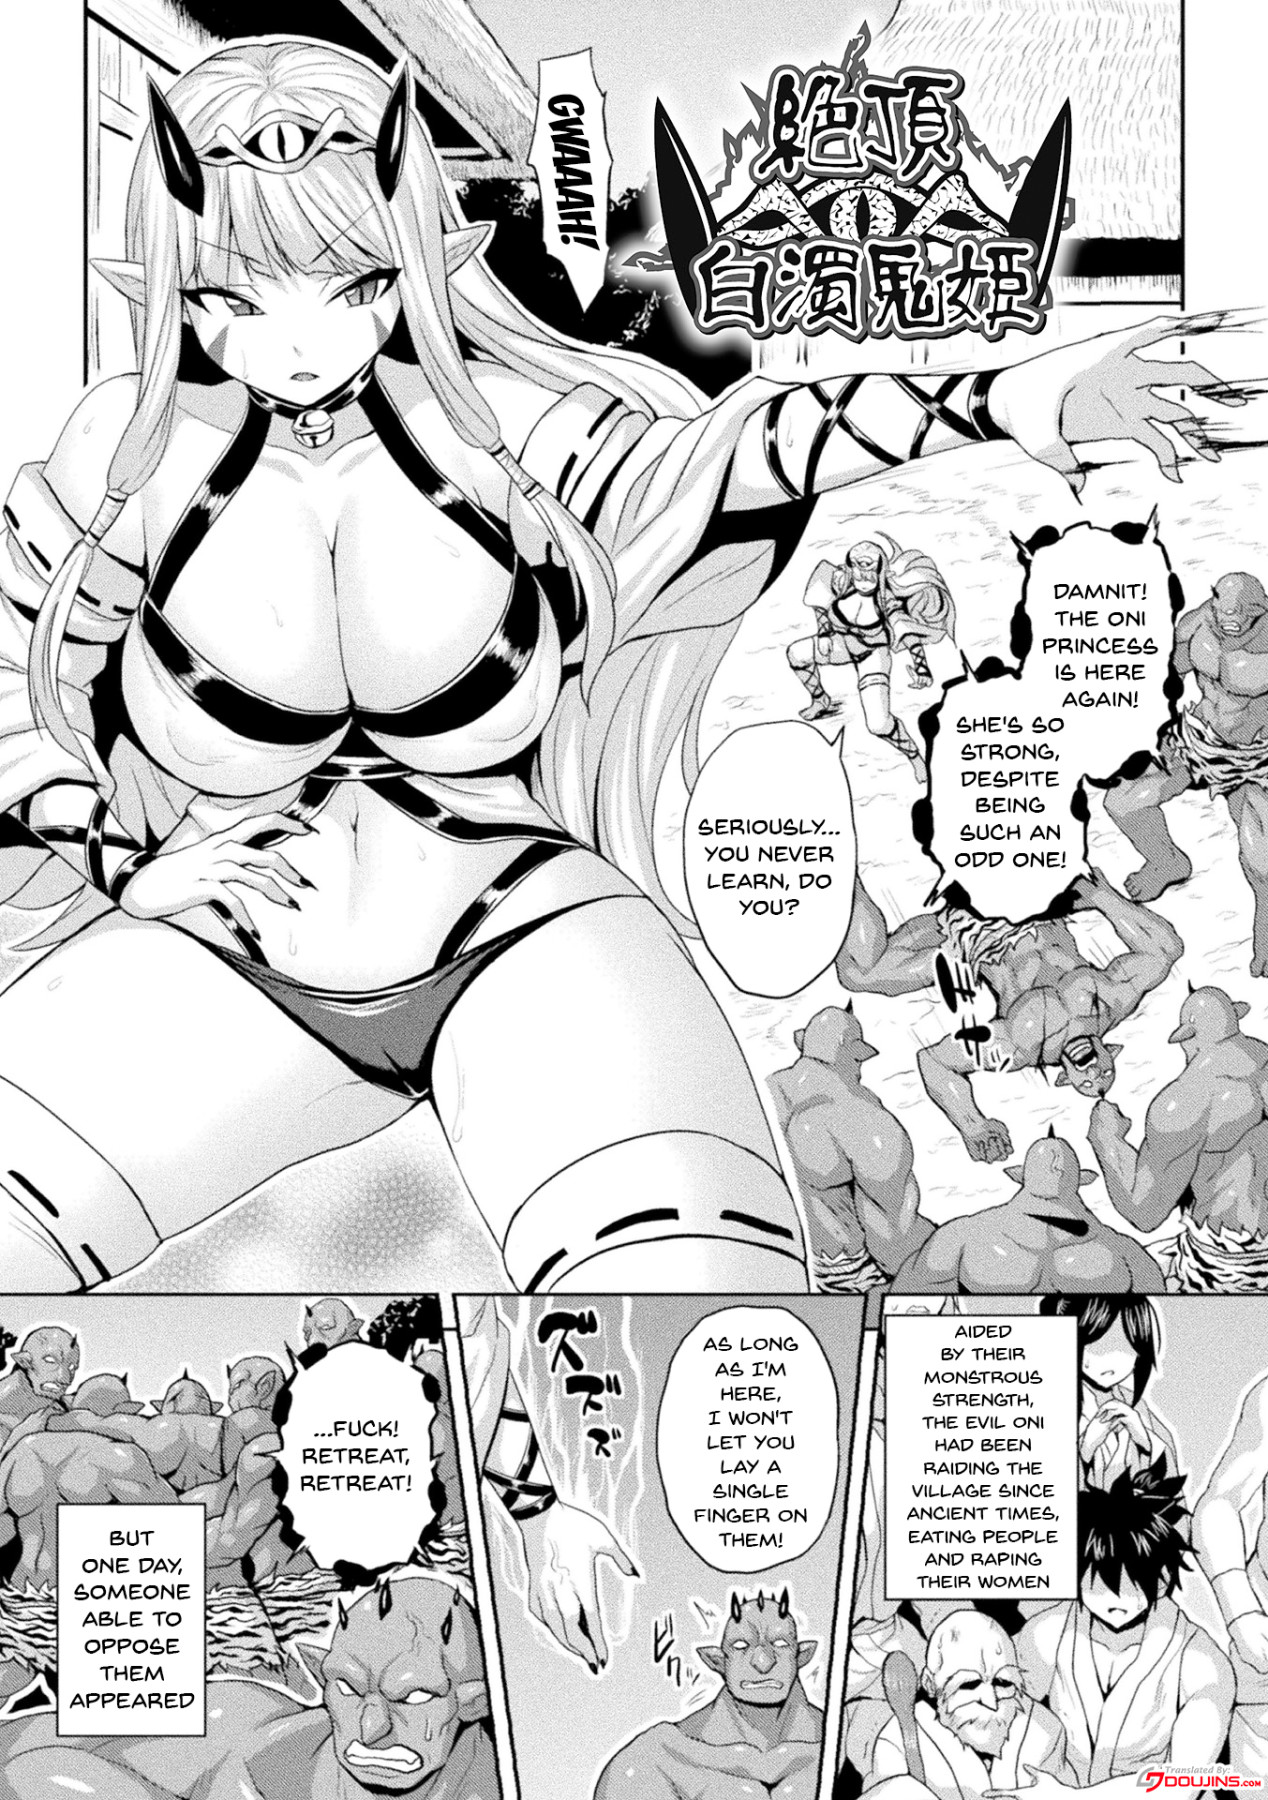 Hentai Manga Comic-The Woman Who's Fallen Into Being a Slut In Defeat-Chapter 3-1